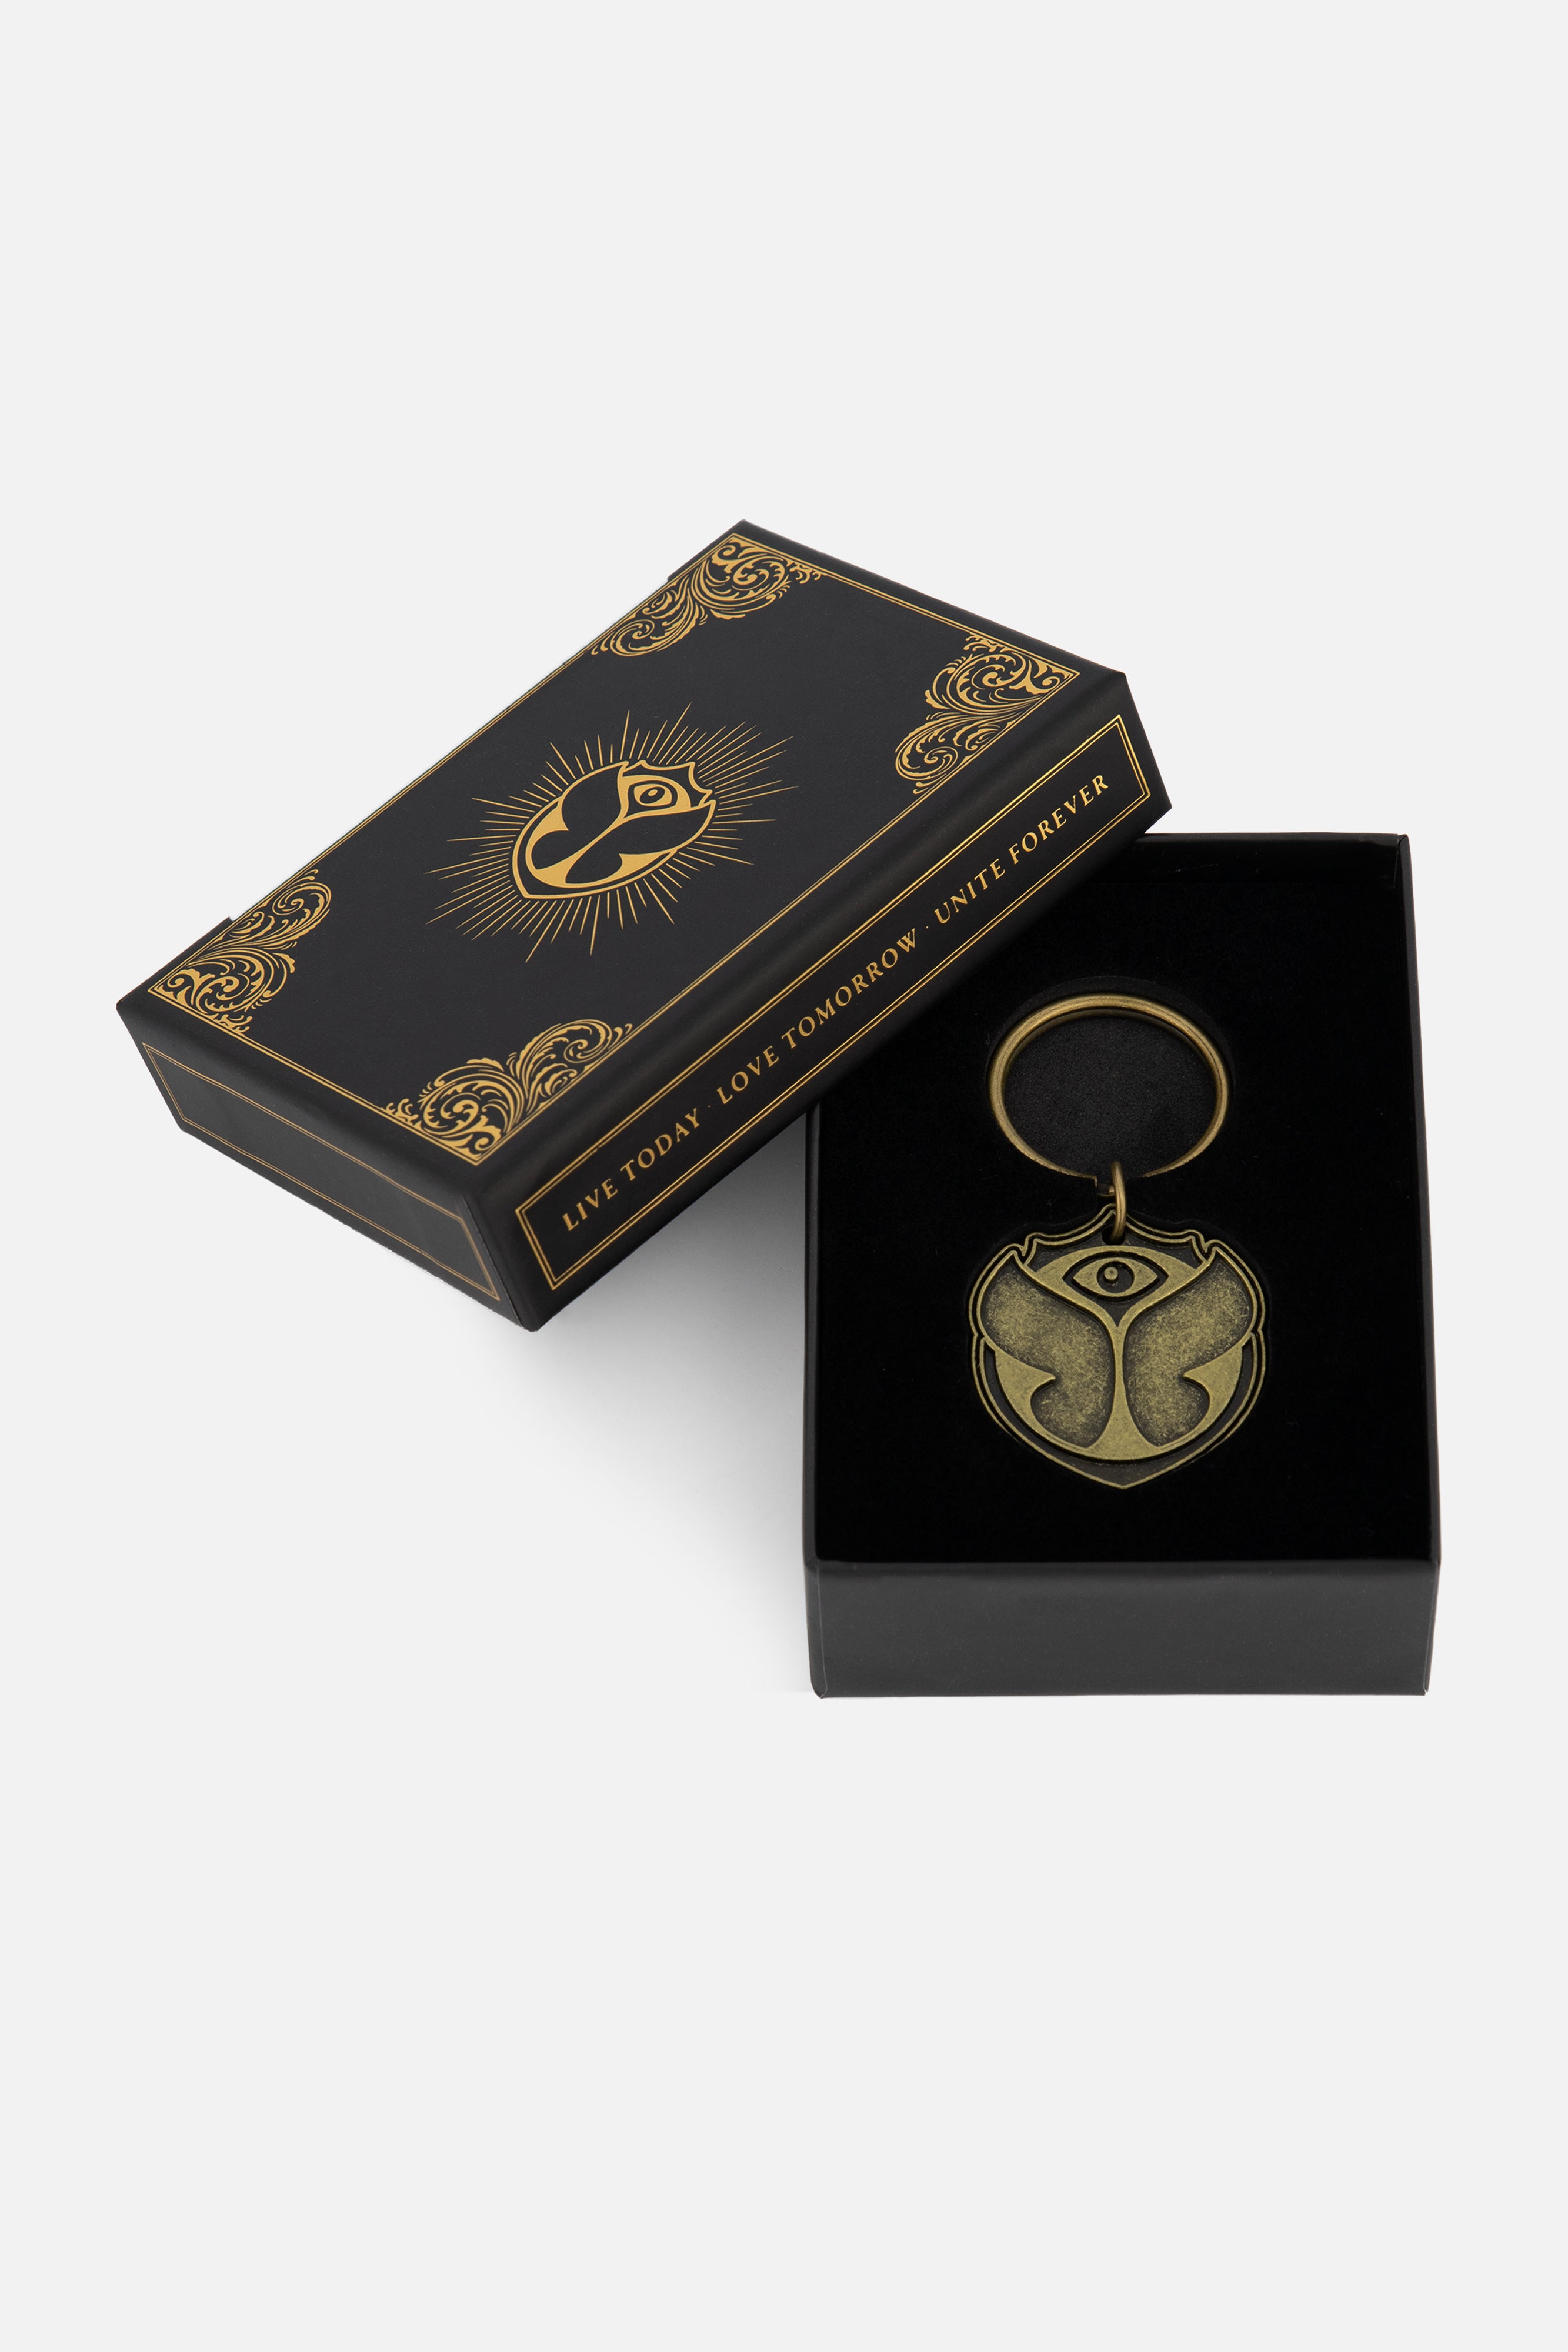 COLLECTIBLES – Tomorrowland Store